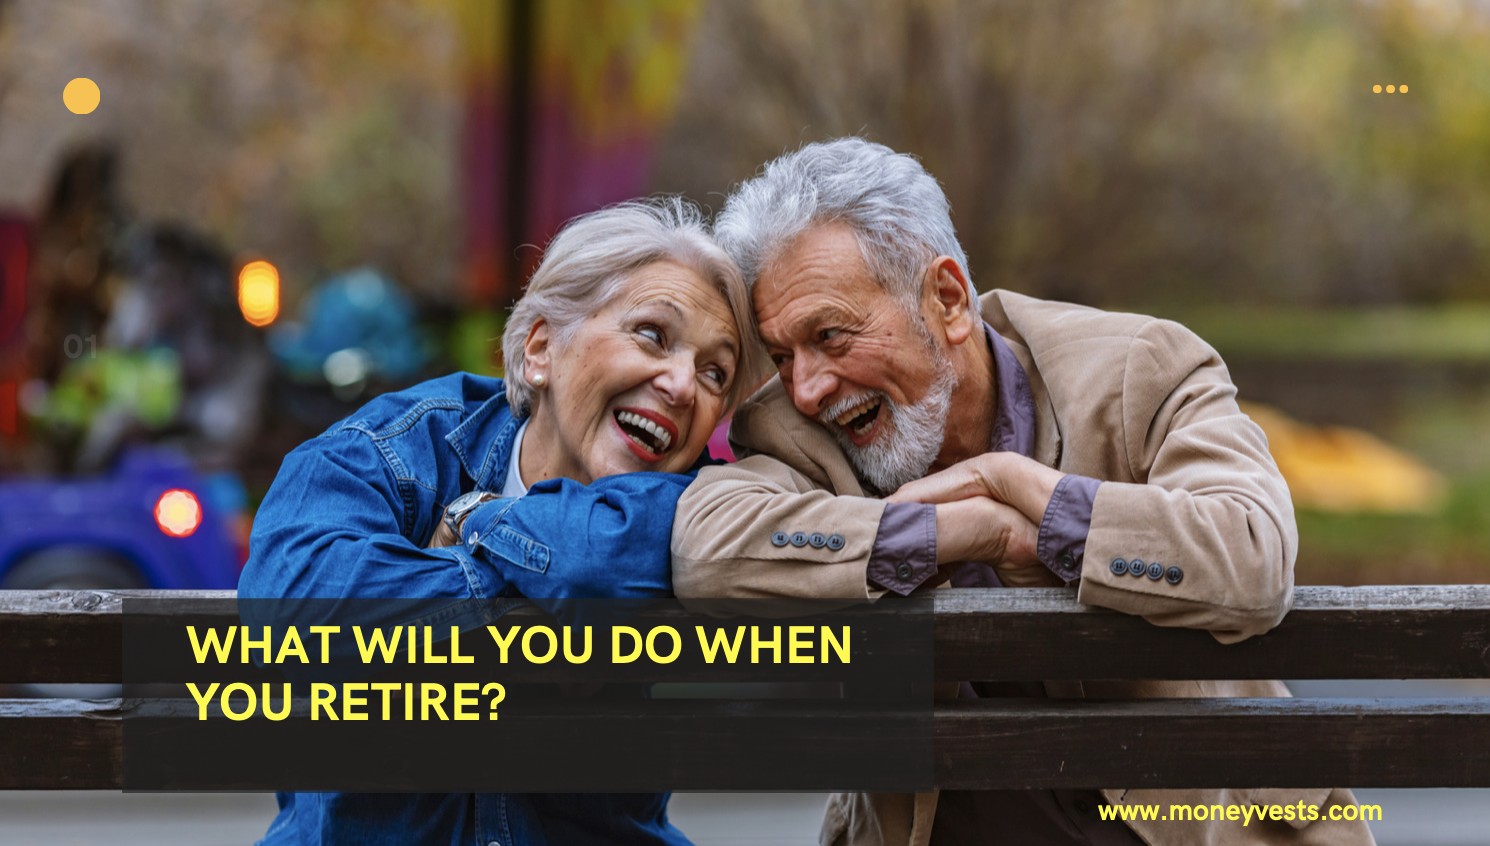 What Will You Do When You Retire? 7 Amazing Tips to Know